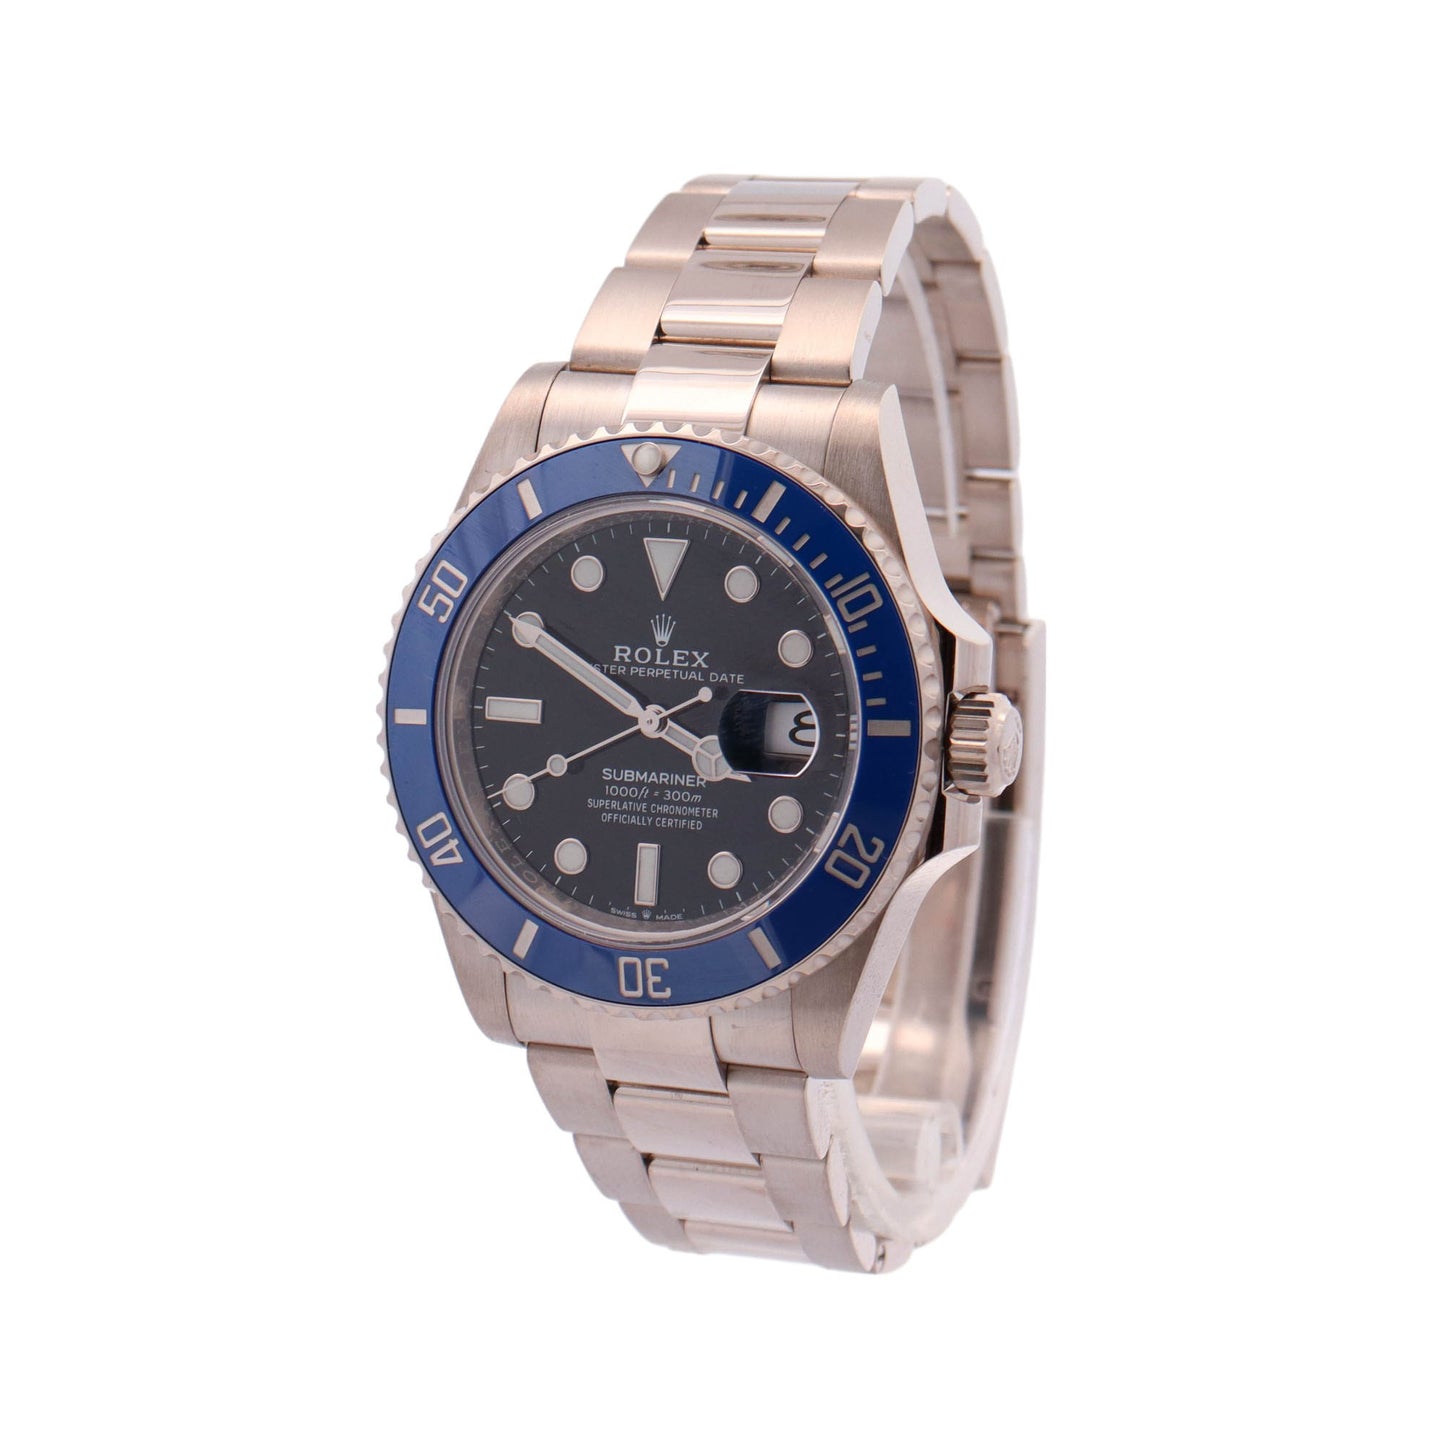 Rolex Submariner White Gold 41mm Black Dot Dial Watch Reference #: 126619LB - Happy Jewelers Fine Jewelry Lifetime Warranty